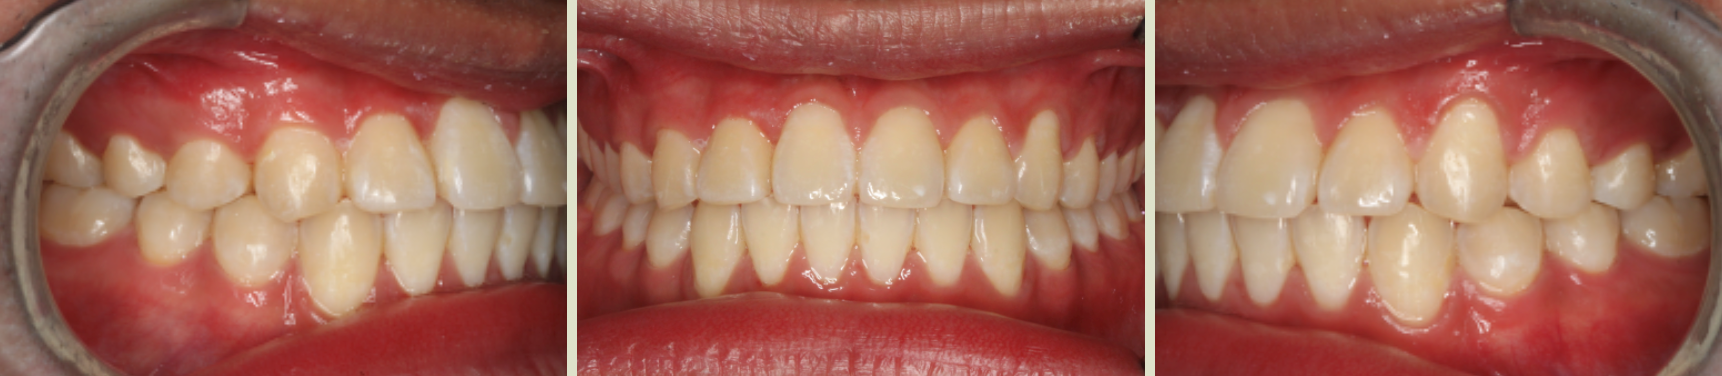 After photo (front view of teeth): Underbite, Case Study #4